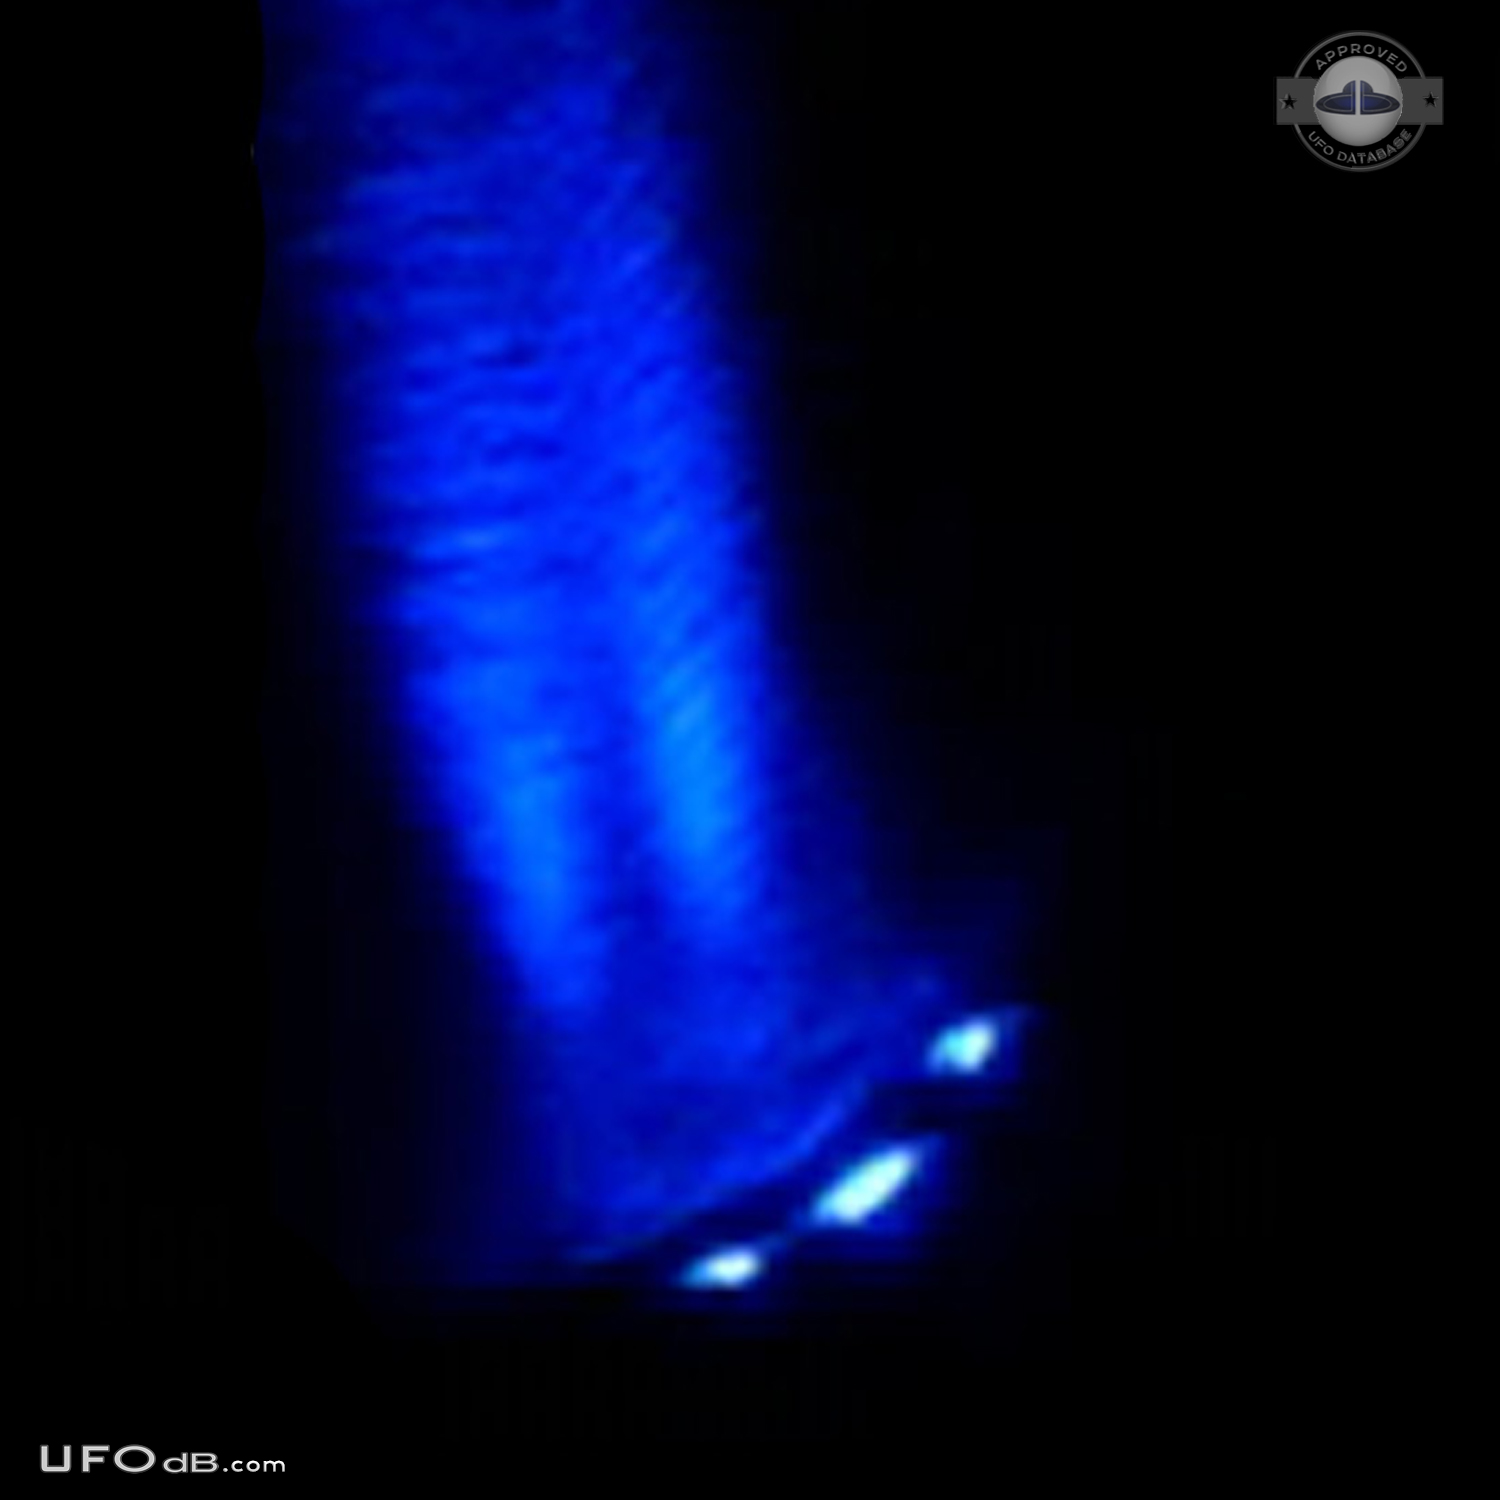 Incredible UFO images taken from video - Pipestone, Minnesota - 2012 UFO Picture #536-3